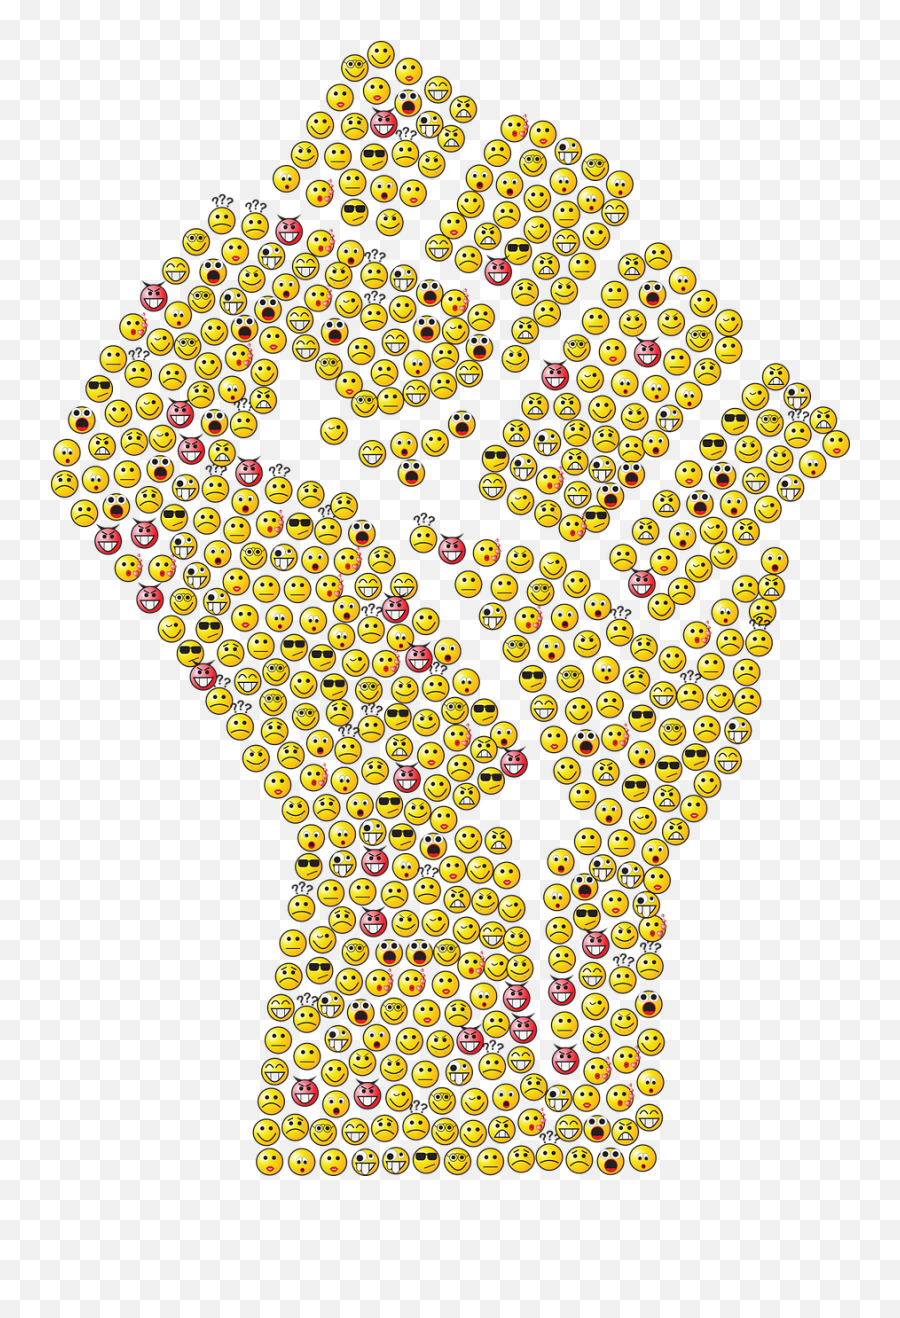 Fist Hand Clenched - Blm Fist Transparent Background Png,Fist Emoji Png